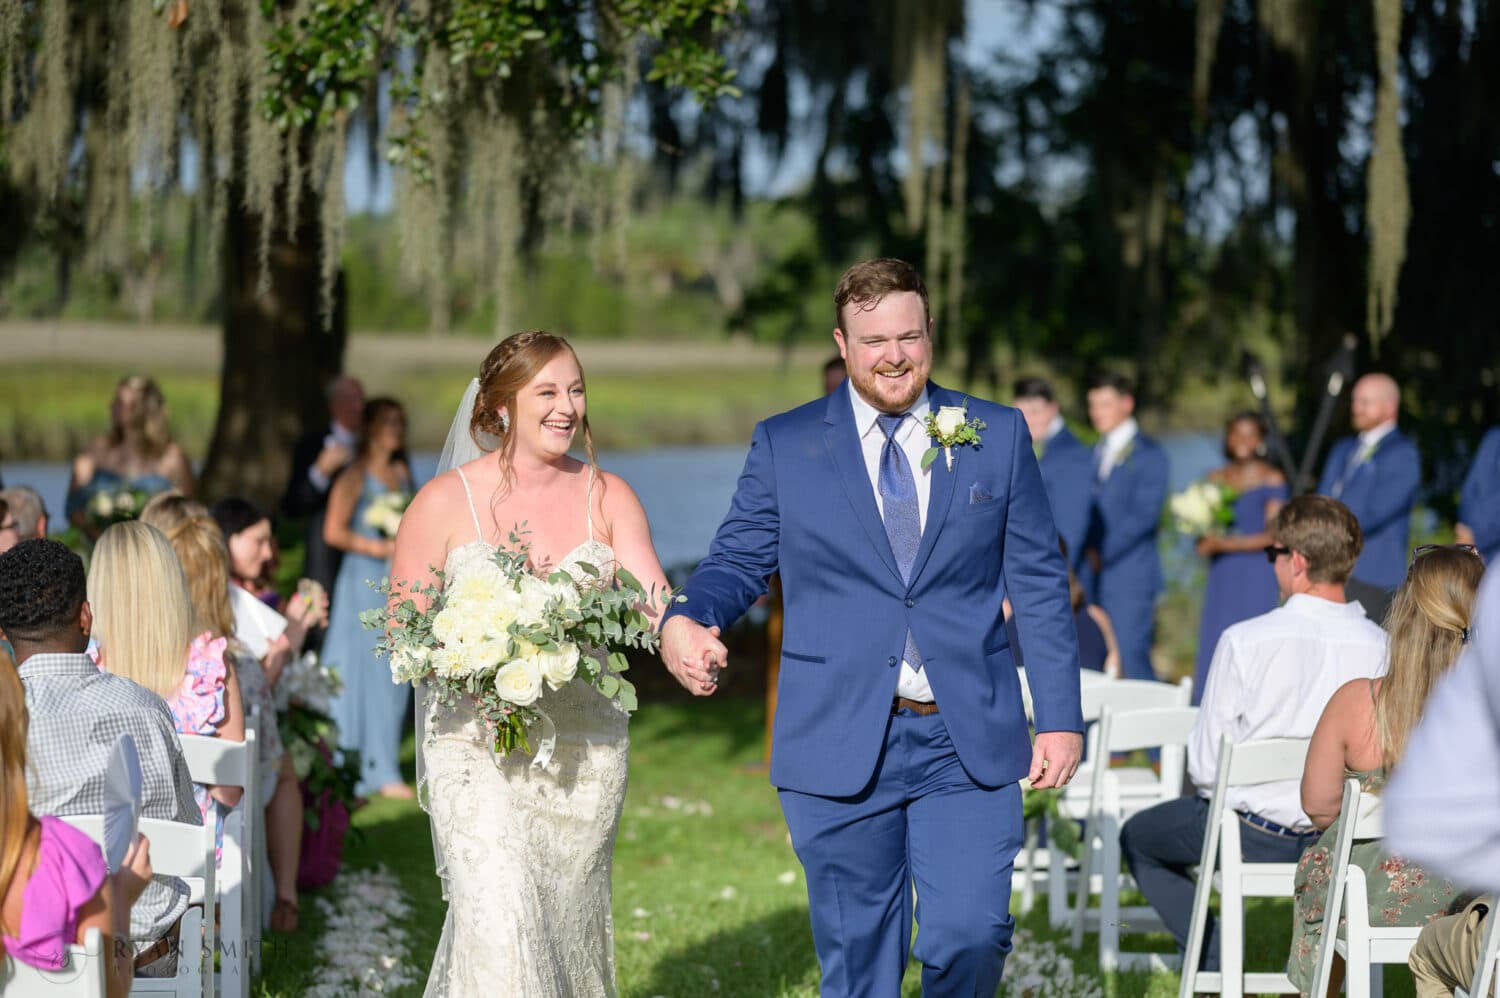 Happiness after the ceremony - Magnolia Plantation